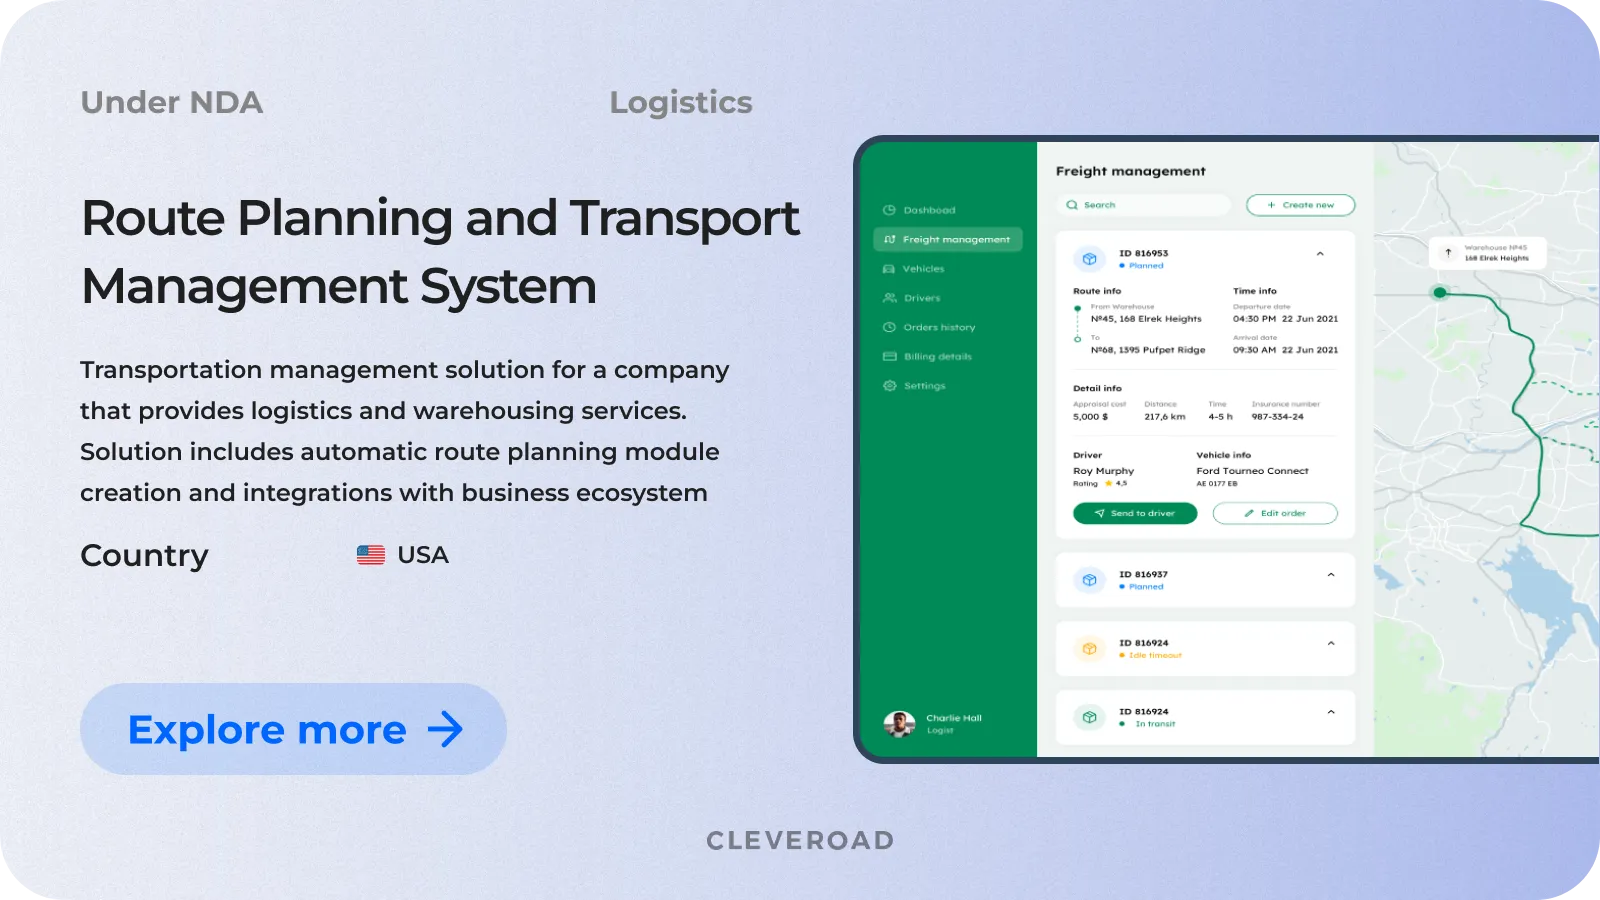 Transportation management system created by Cleveroad